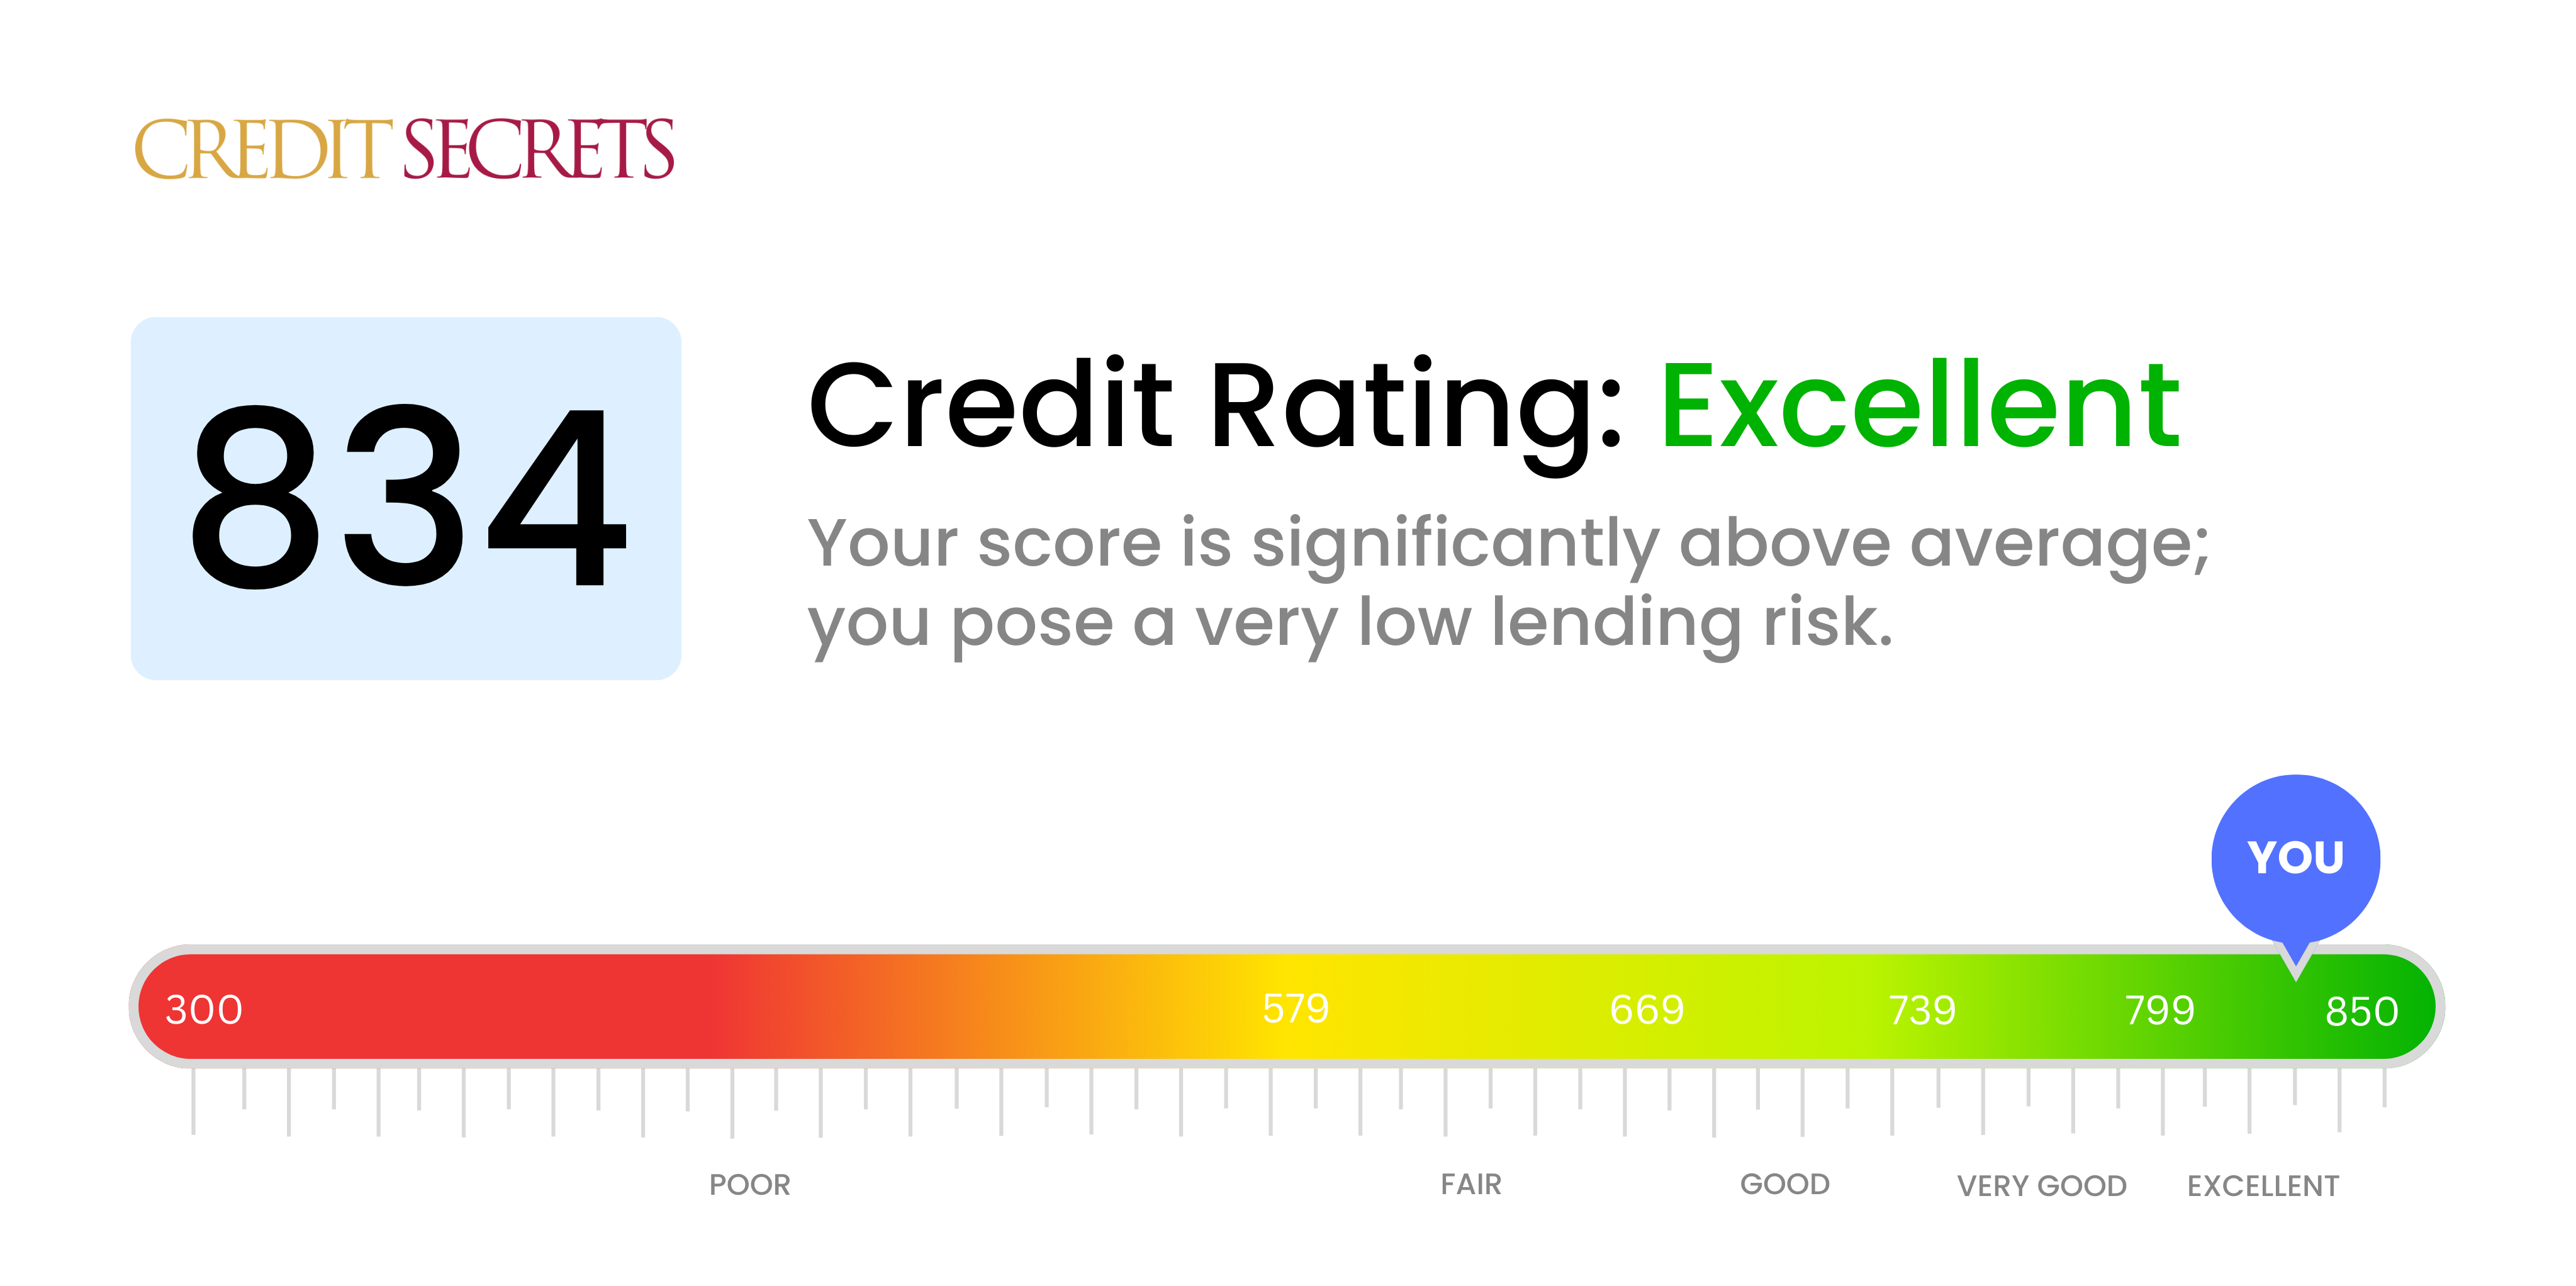 Is 834 a good credit score?